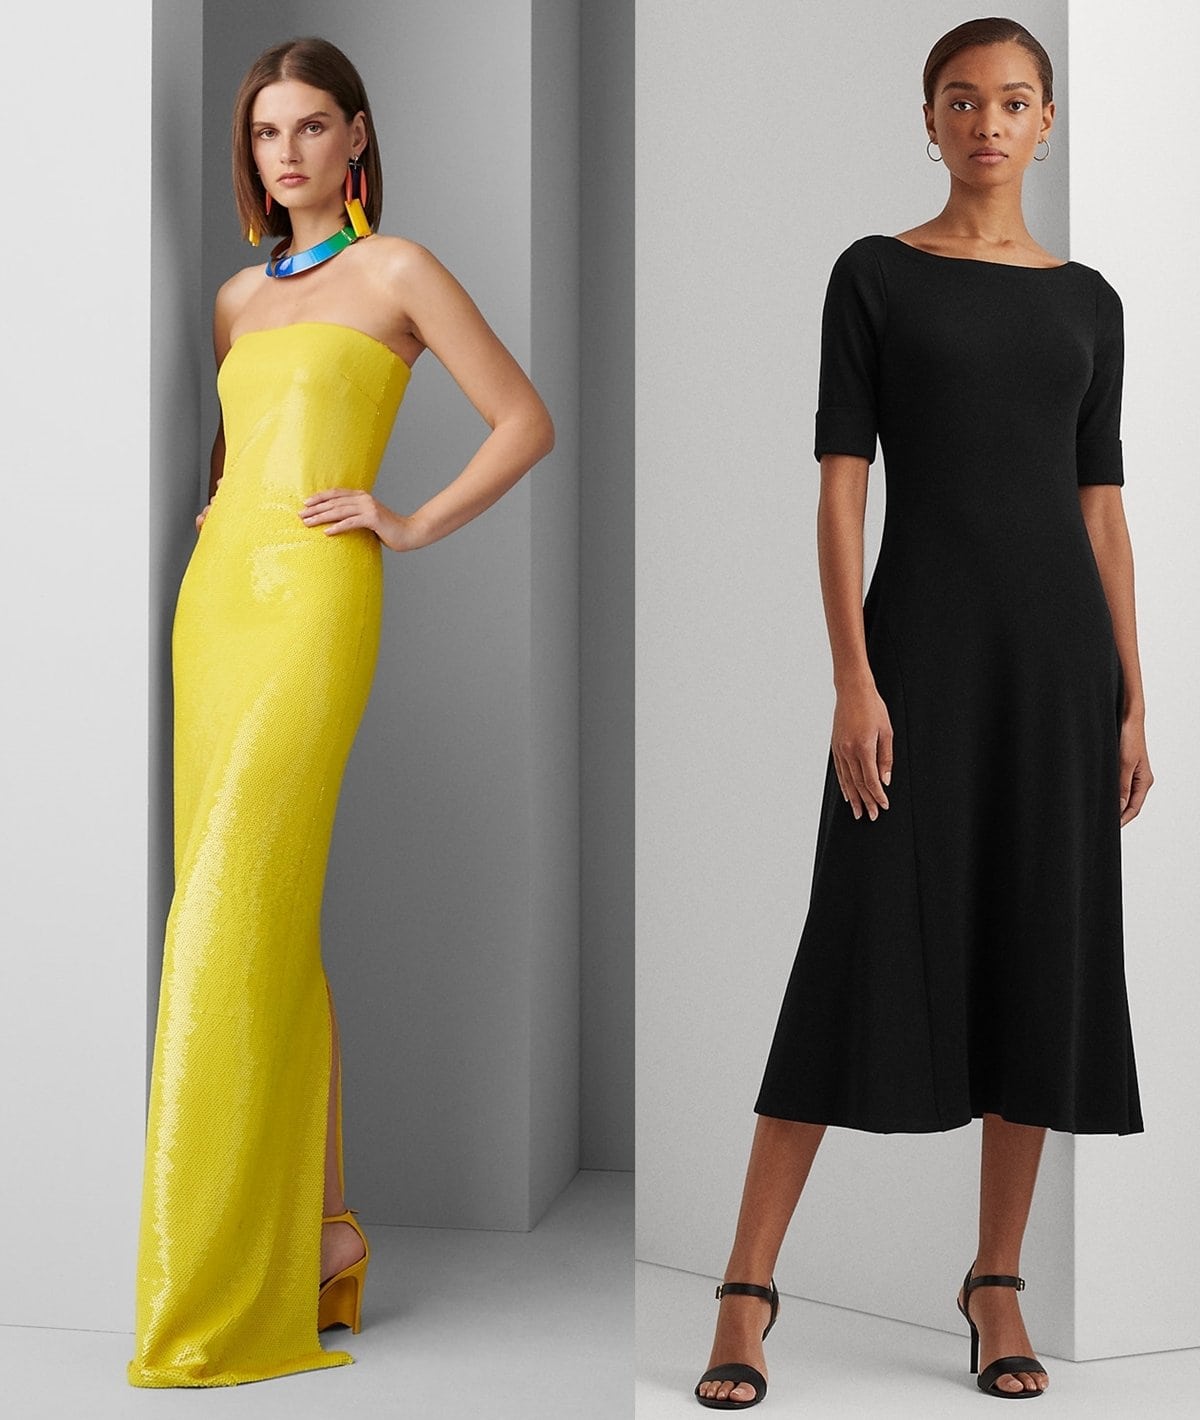 Sequined sunshine yellow strapless gown and fit-and-flare midi dress from the American publicly-traded fashion company Ralph Lauren Corporation